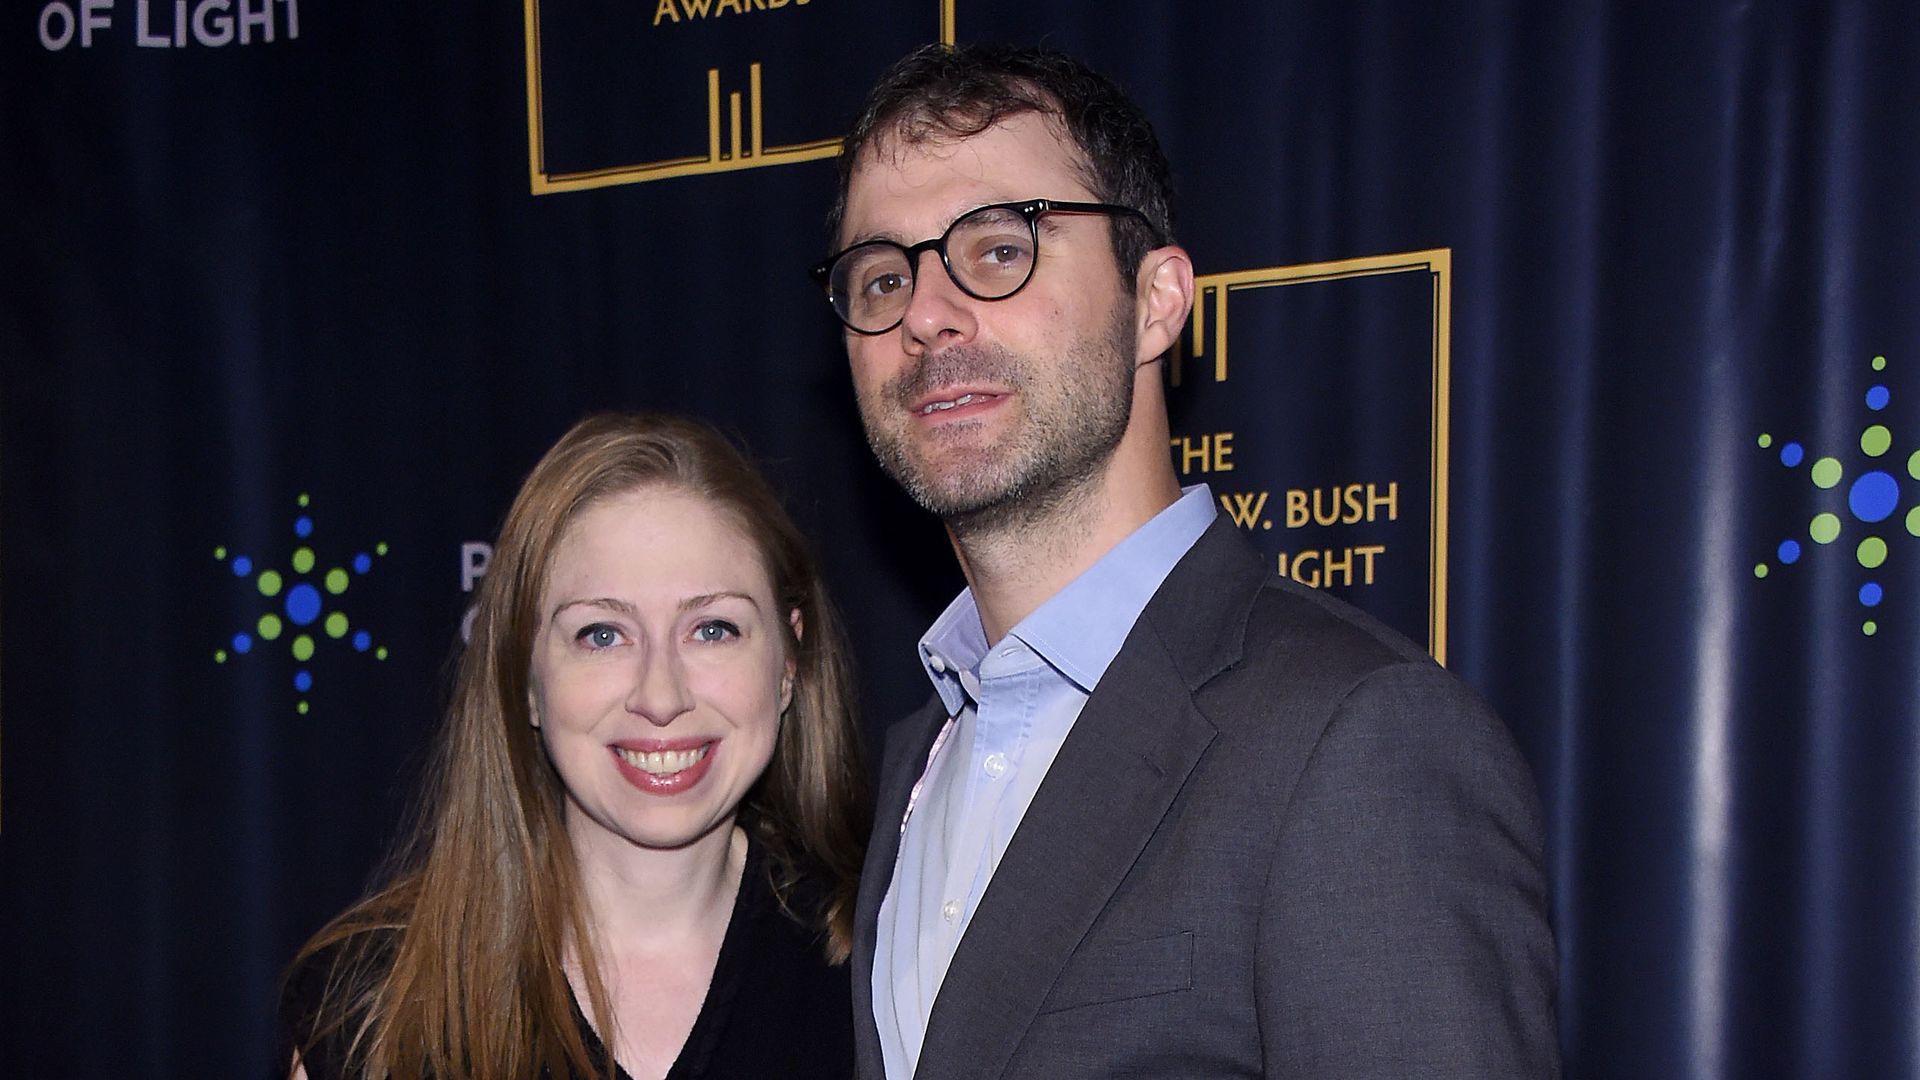 Chelsea Clinton and Marc Mezvinsky attend The George H.W. Bush Points Of Light Awards Gala at Intrepid Sea-Air-Space Museum on September 26, 2019 in New York City